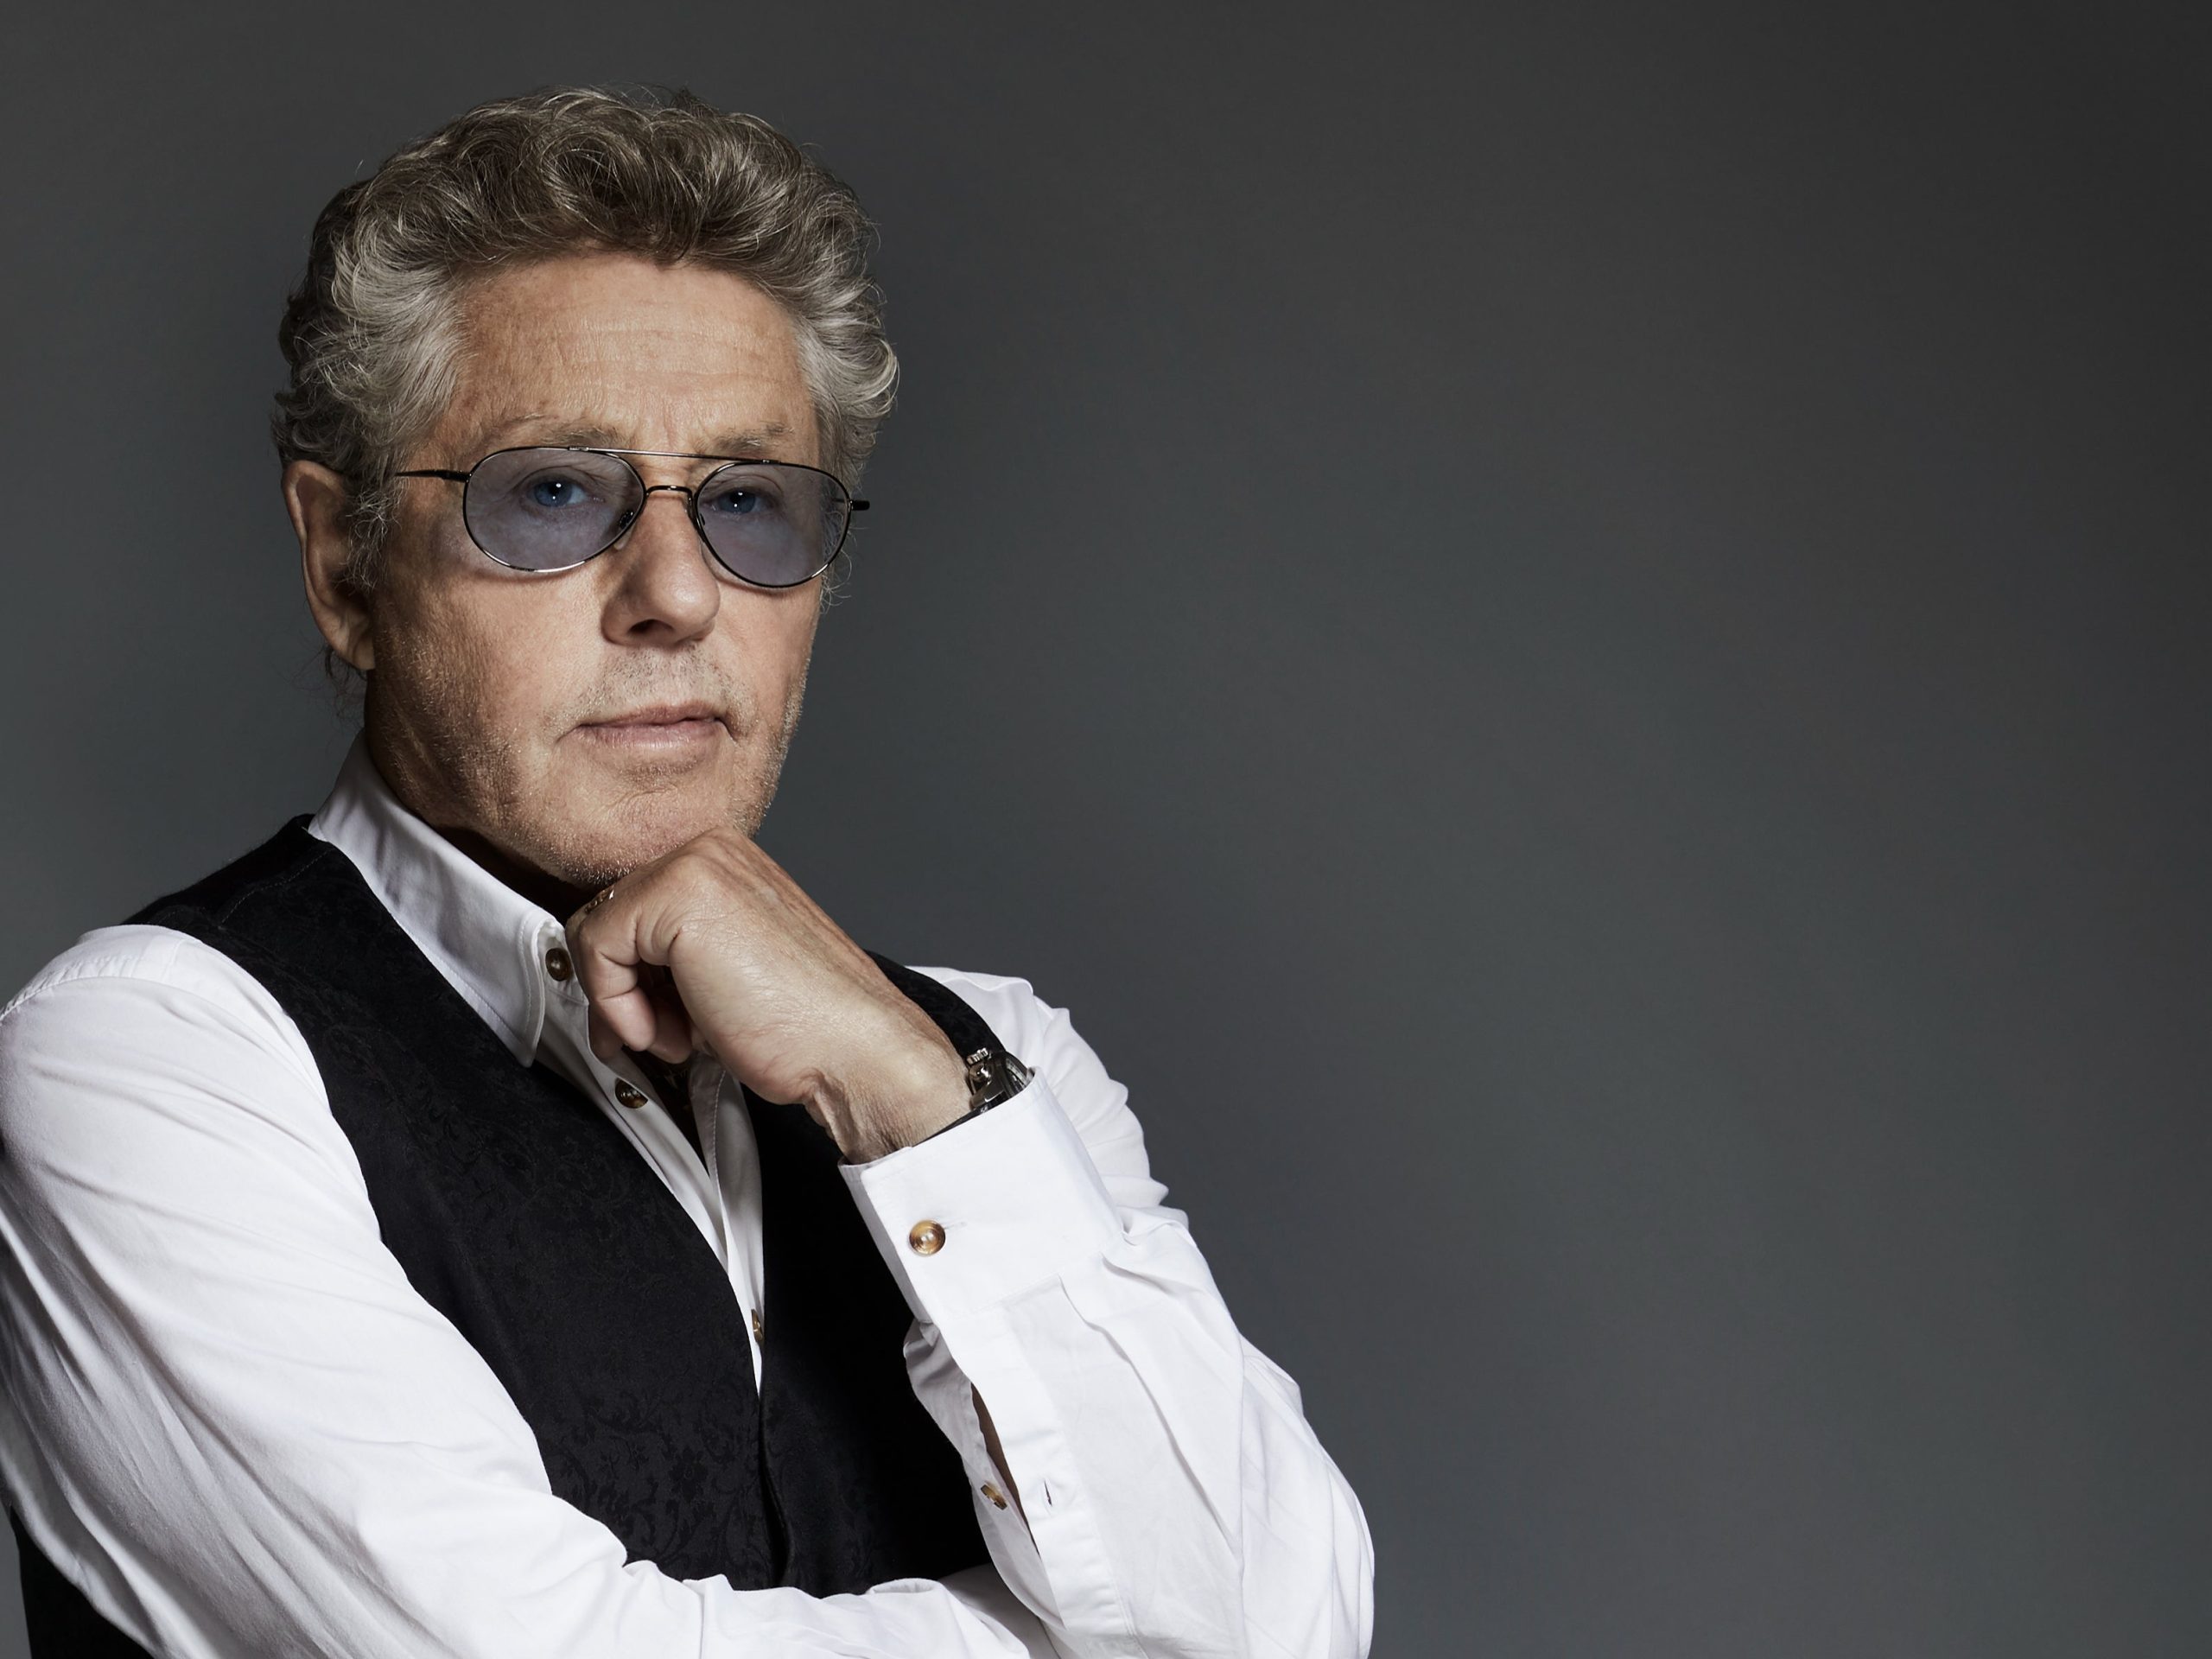 Roger Daltrey Age, Height, Songs and Music Groups, Education, Family ABTC